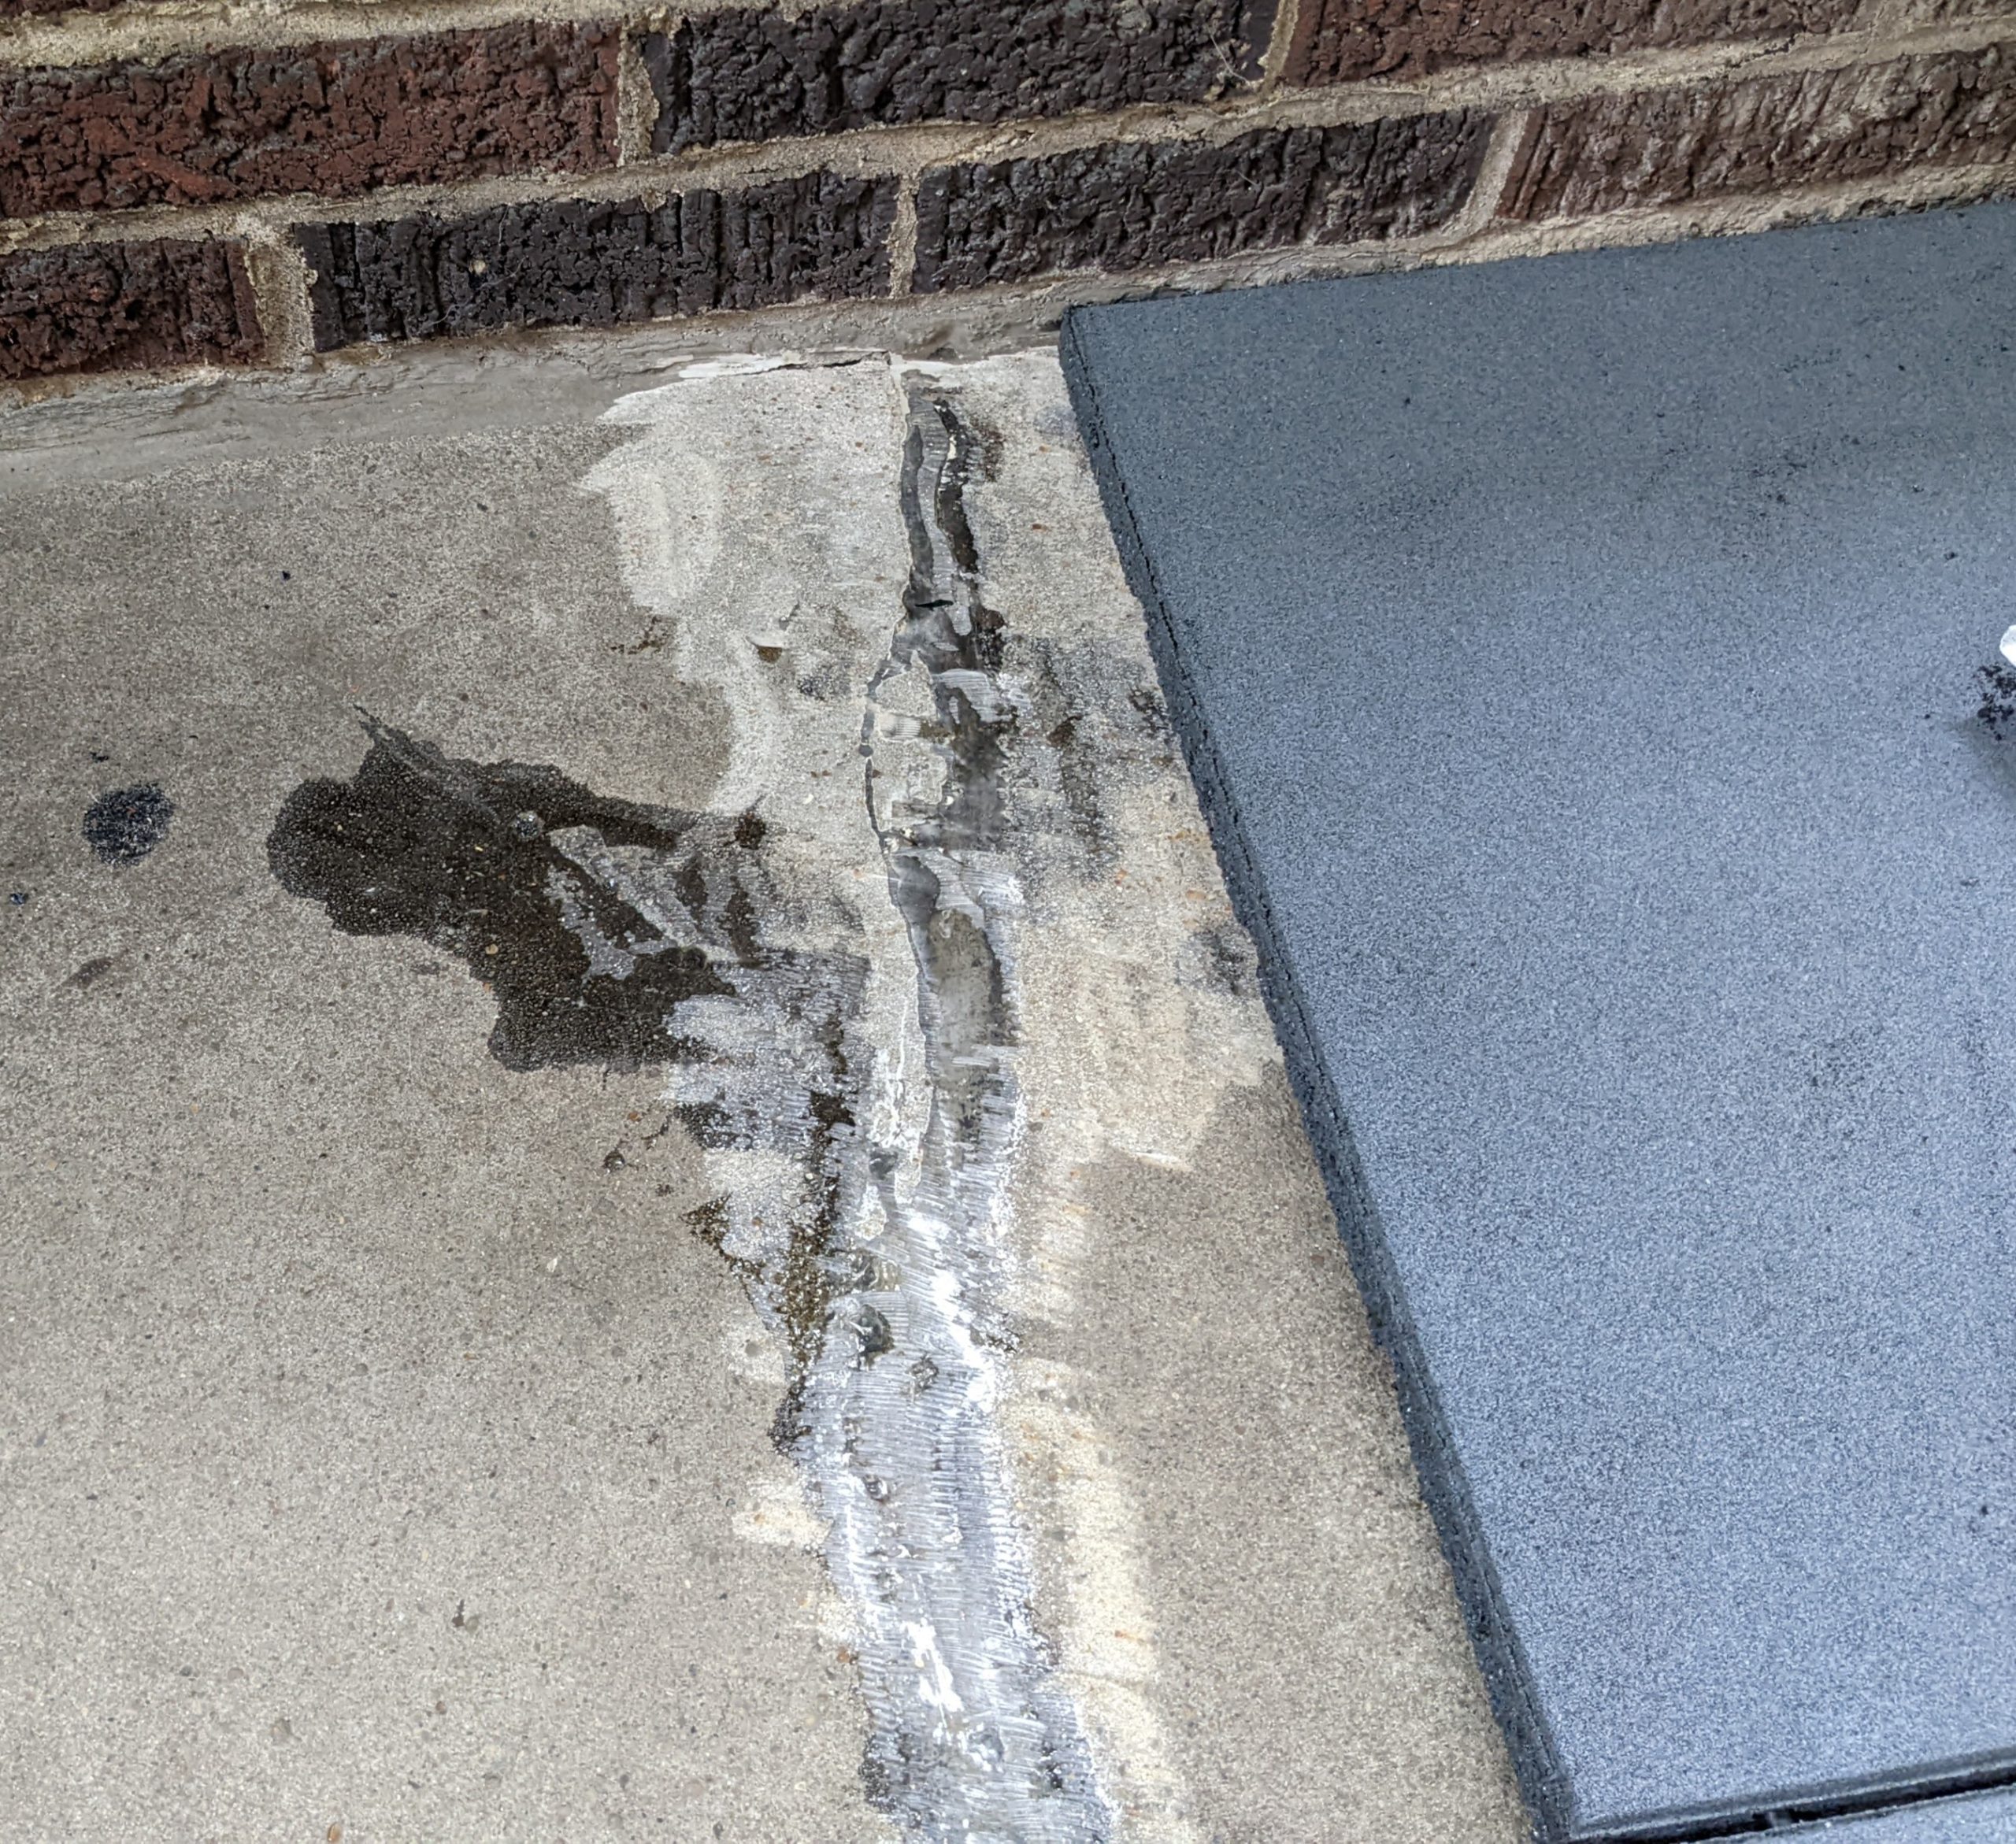 A repaired crack in a concrete floor.